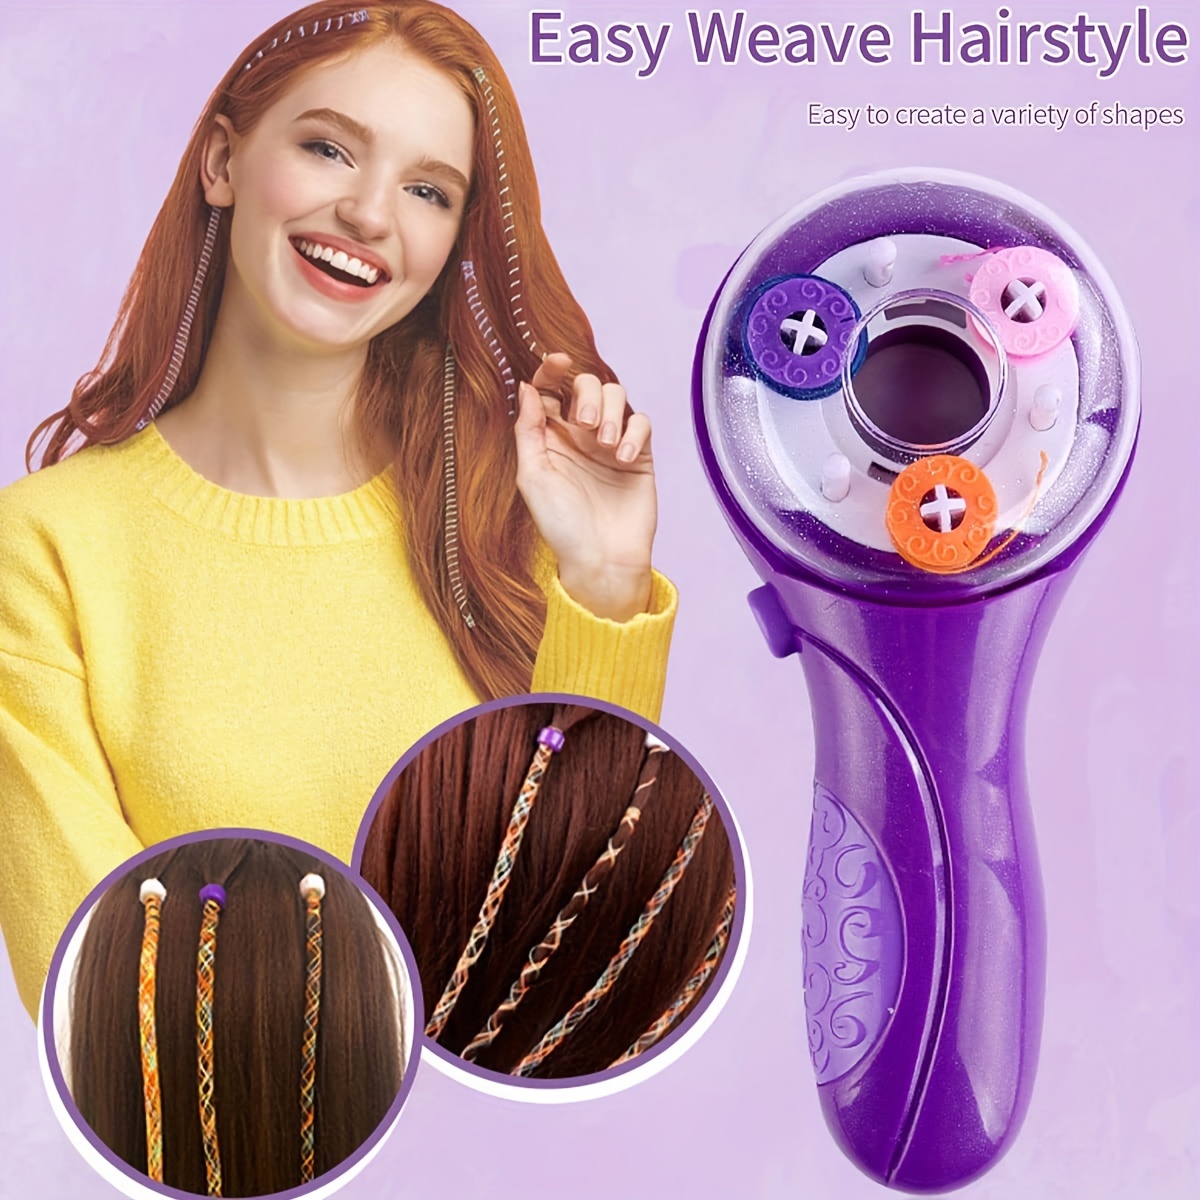 7 Pieces Automatic Hair Braider Set, Includes Electronic Hair